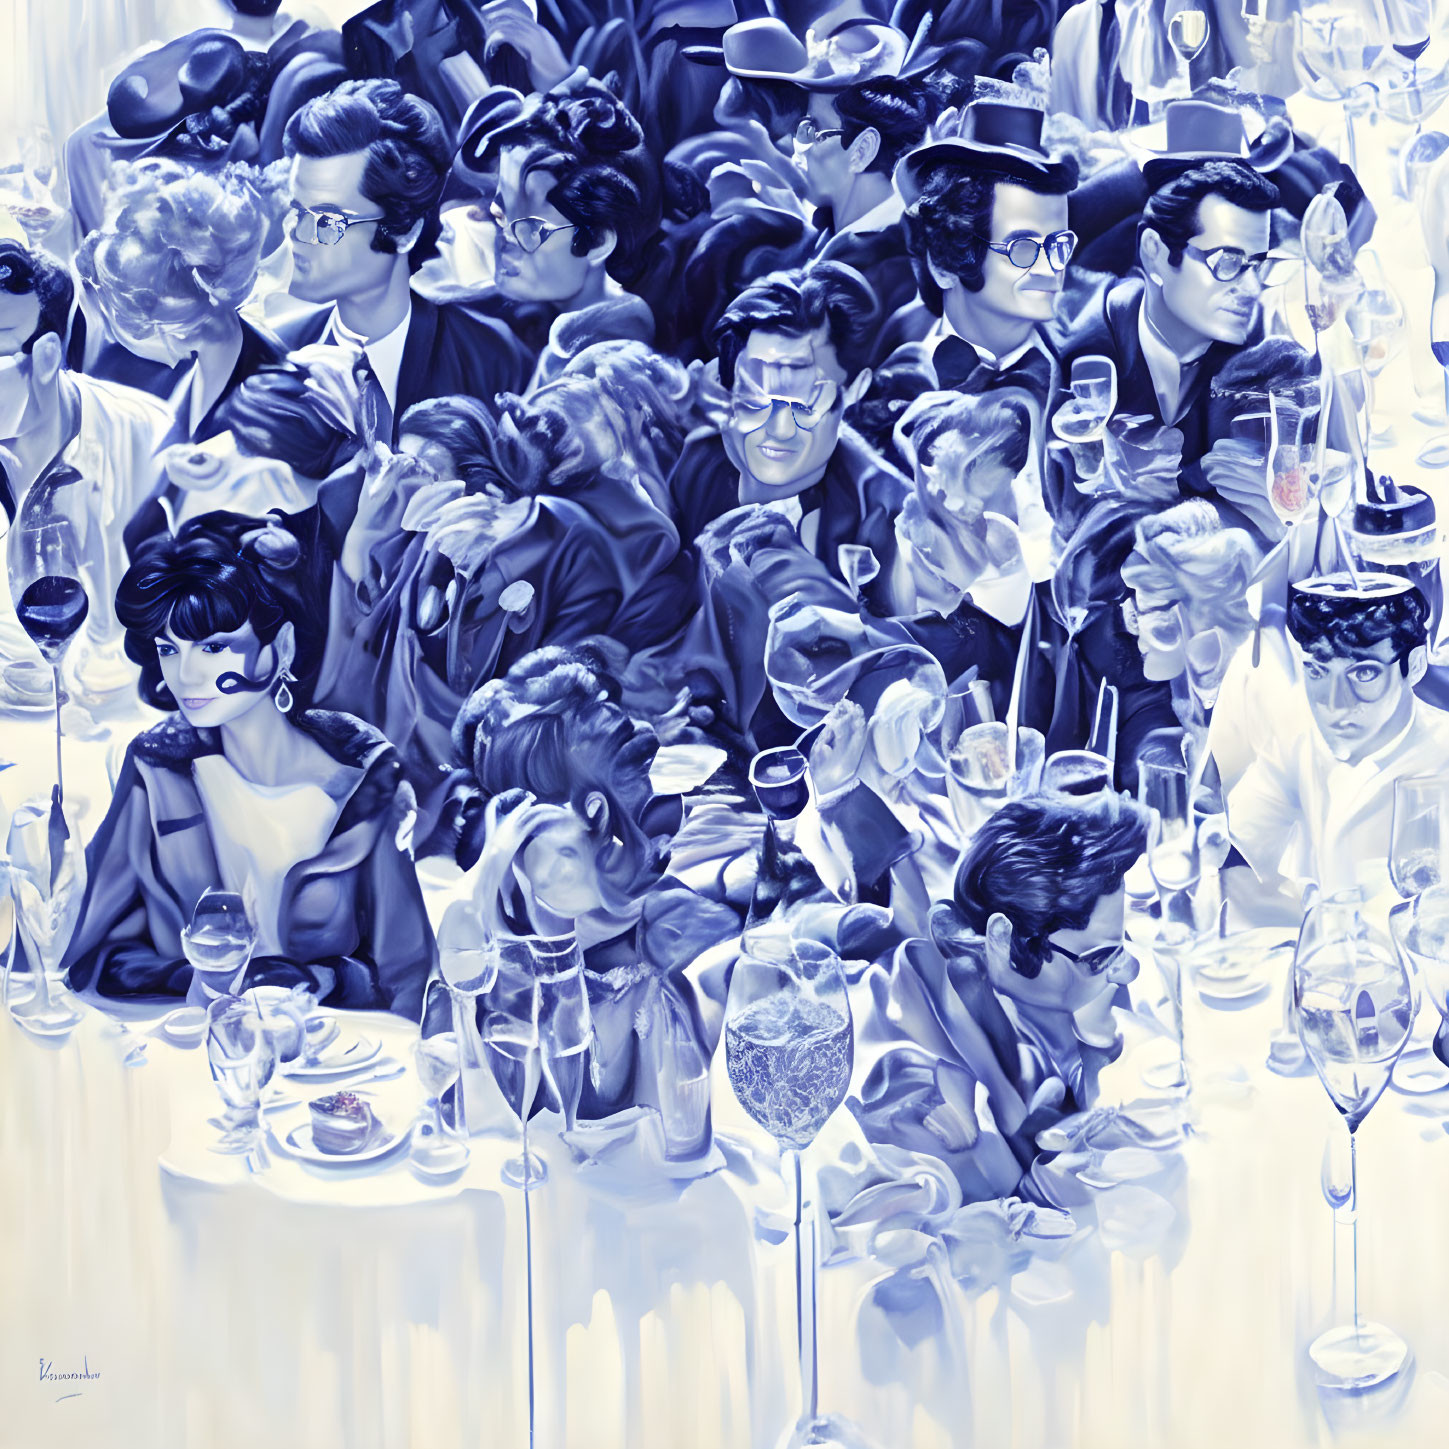 Elegant monochromatic painting of crowded event with stylishly dressed people and wine glasses